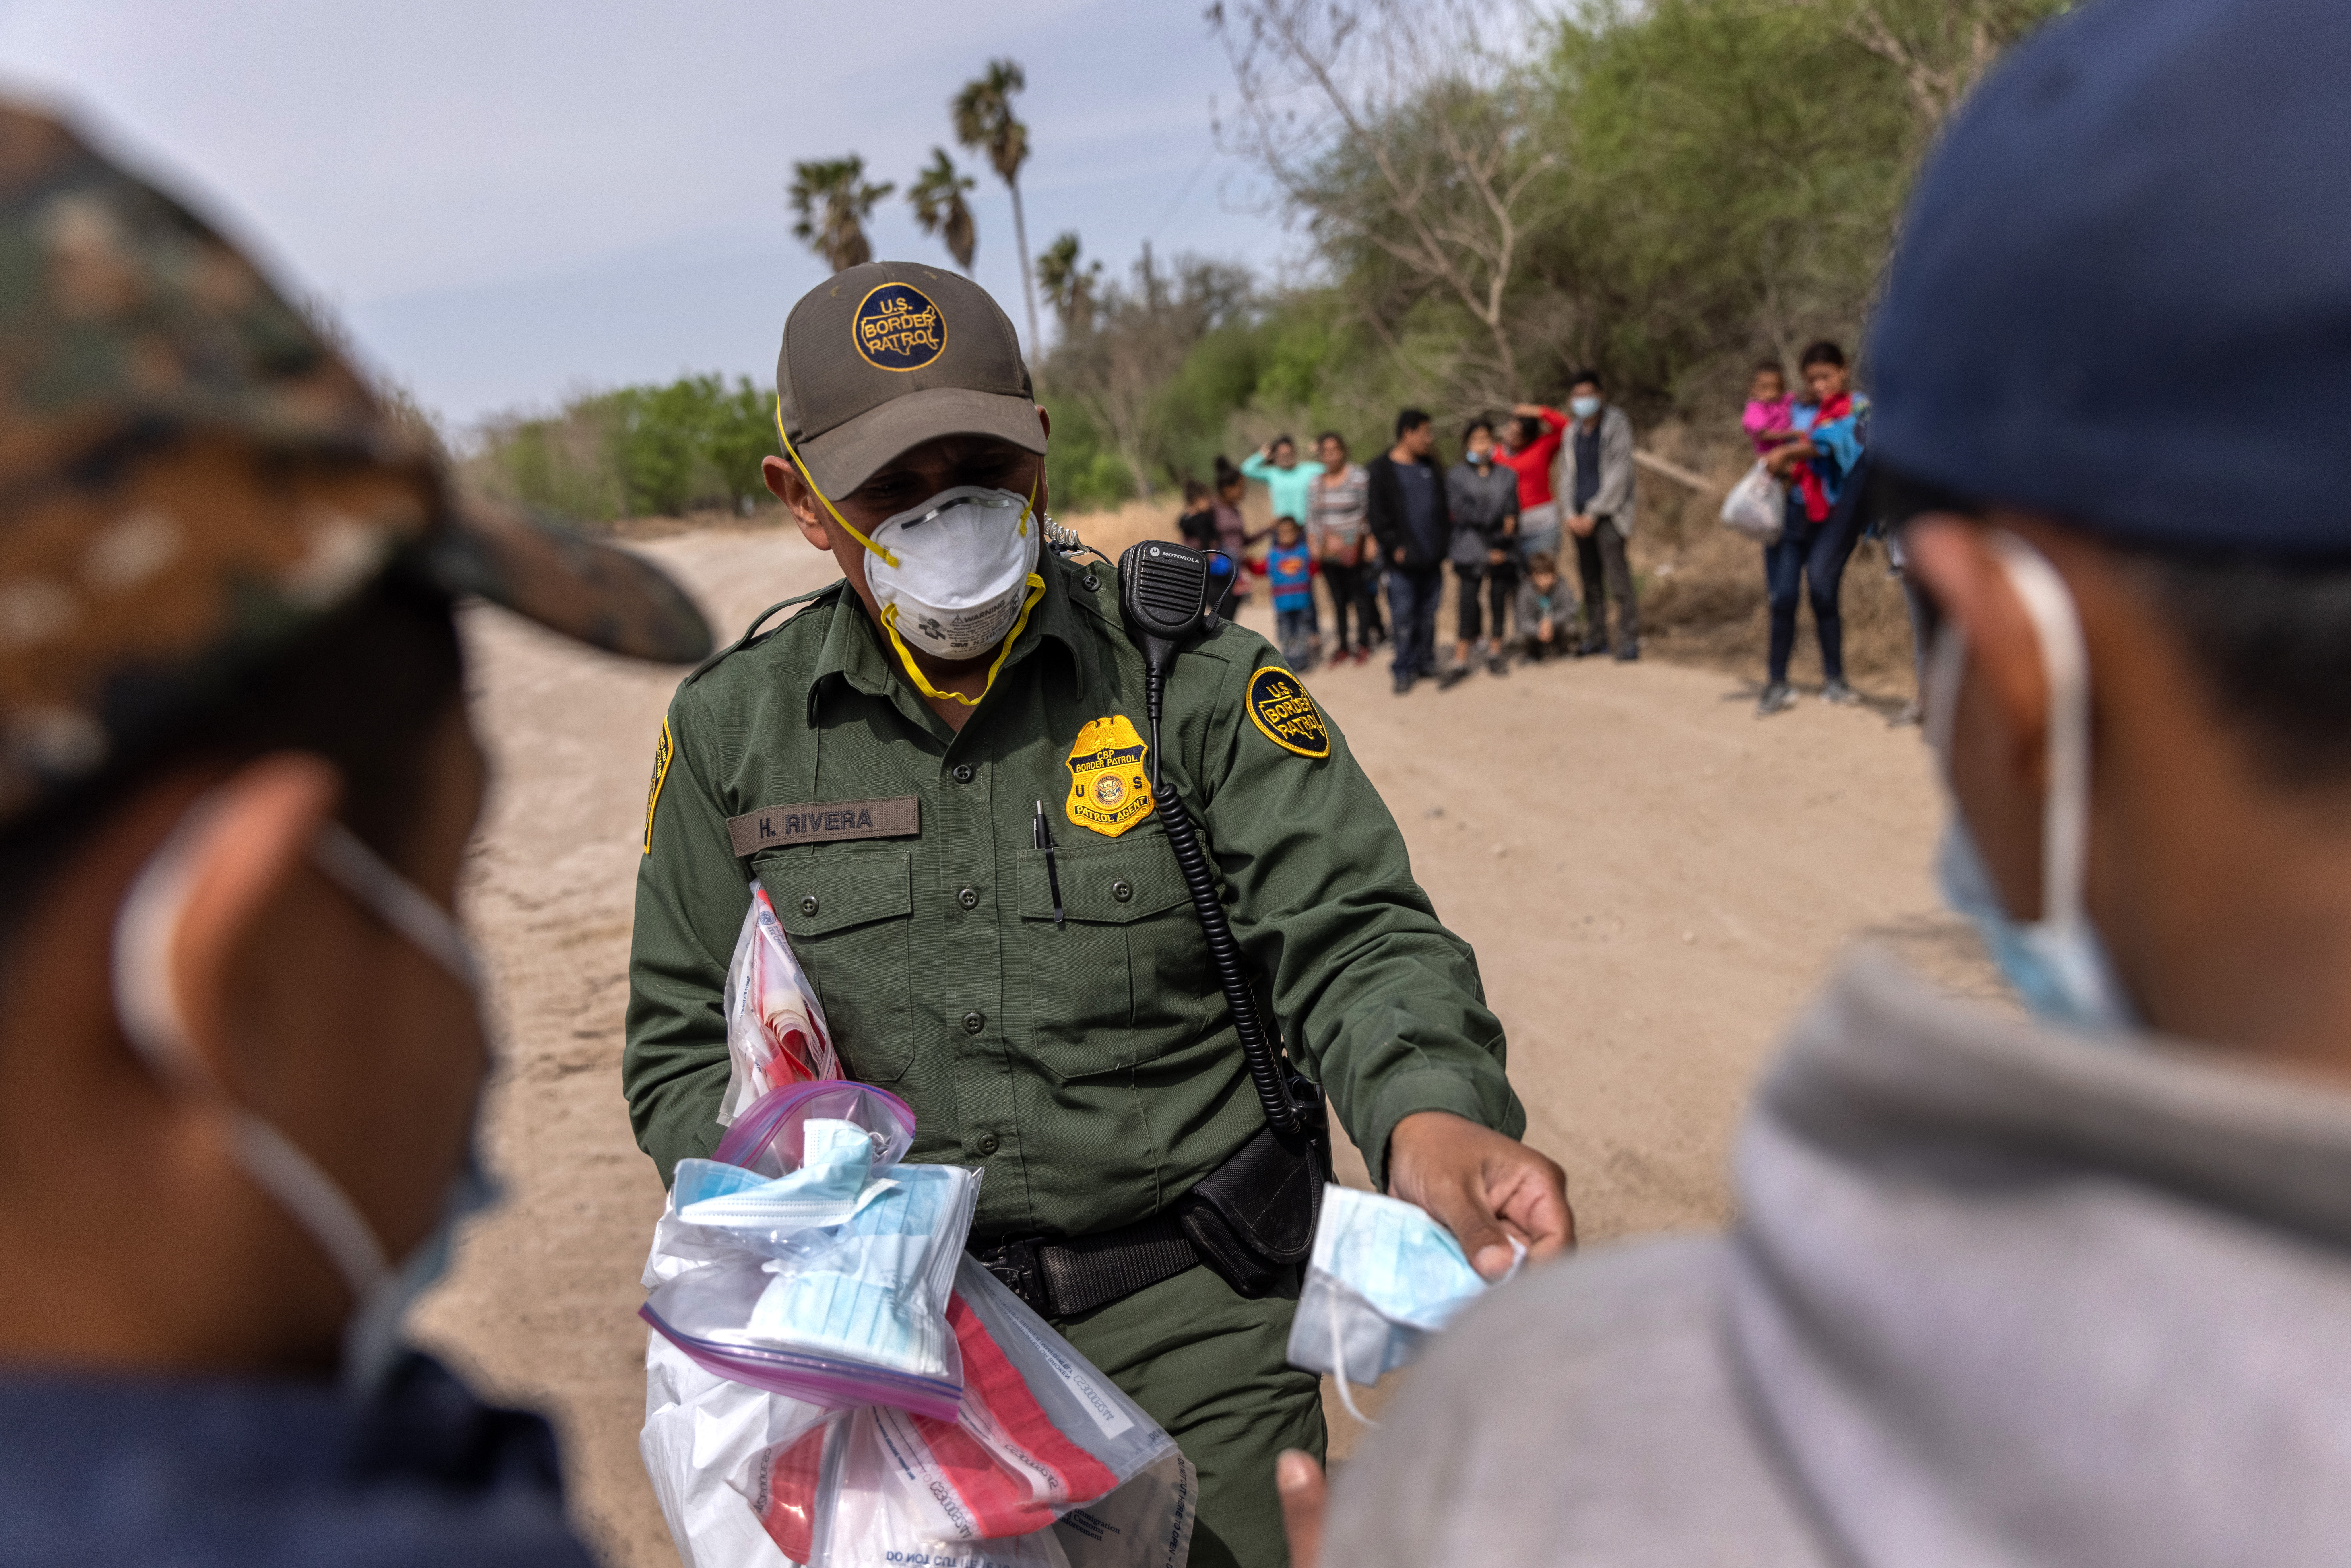 US Says Order Coming This Week on Border Asylum Restrictions